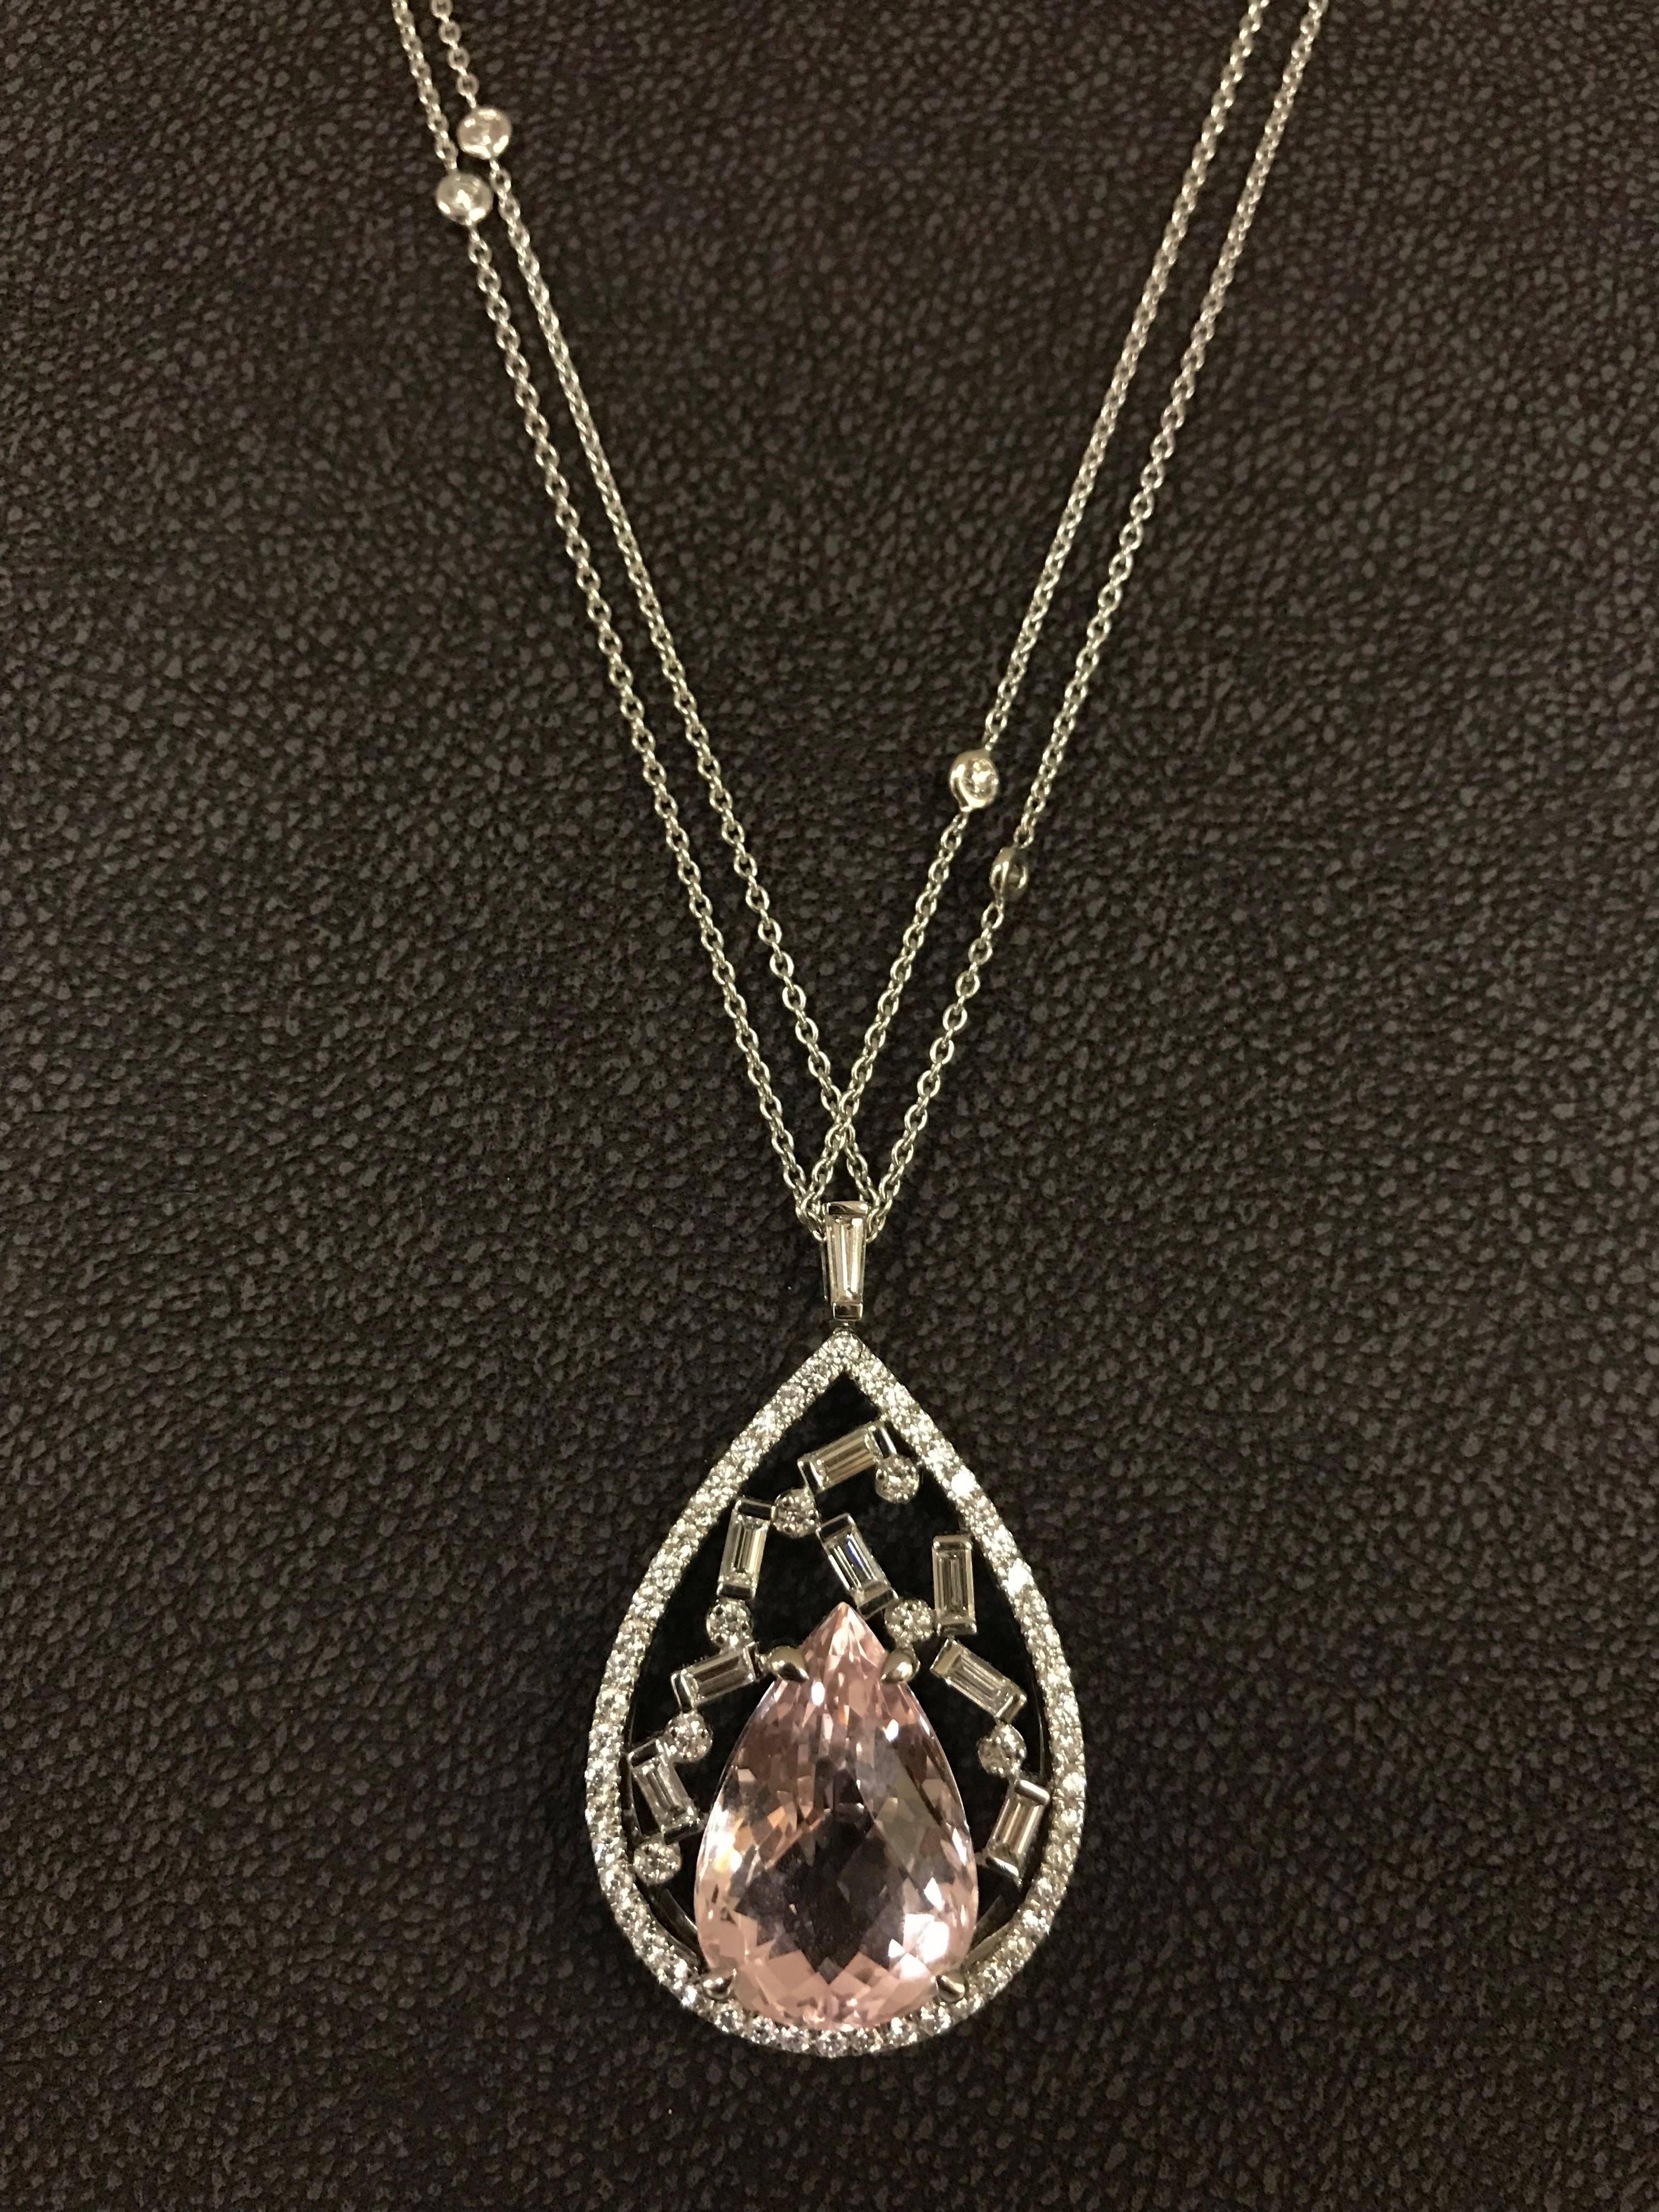 Kunzite Shaped Peach 11,12 Carat and Diamonds Baguettes White Gold Necklace.
Kunzite Shaped Peach 11,12 Carat
Diamonds Baguettes FG/VSSI 0,61 Carat 
Diamonds Brilliants FG/VSSI 1,11 Carat
Diamonds Tapers FG/VSSI 0,10 Carat 
Double Chain with